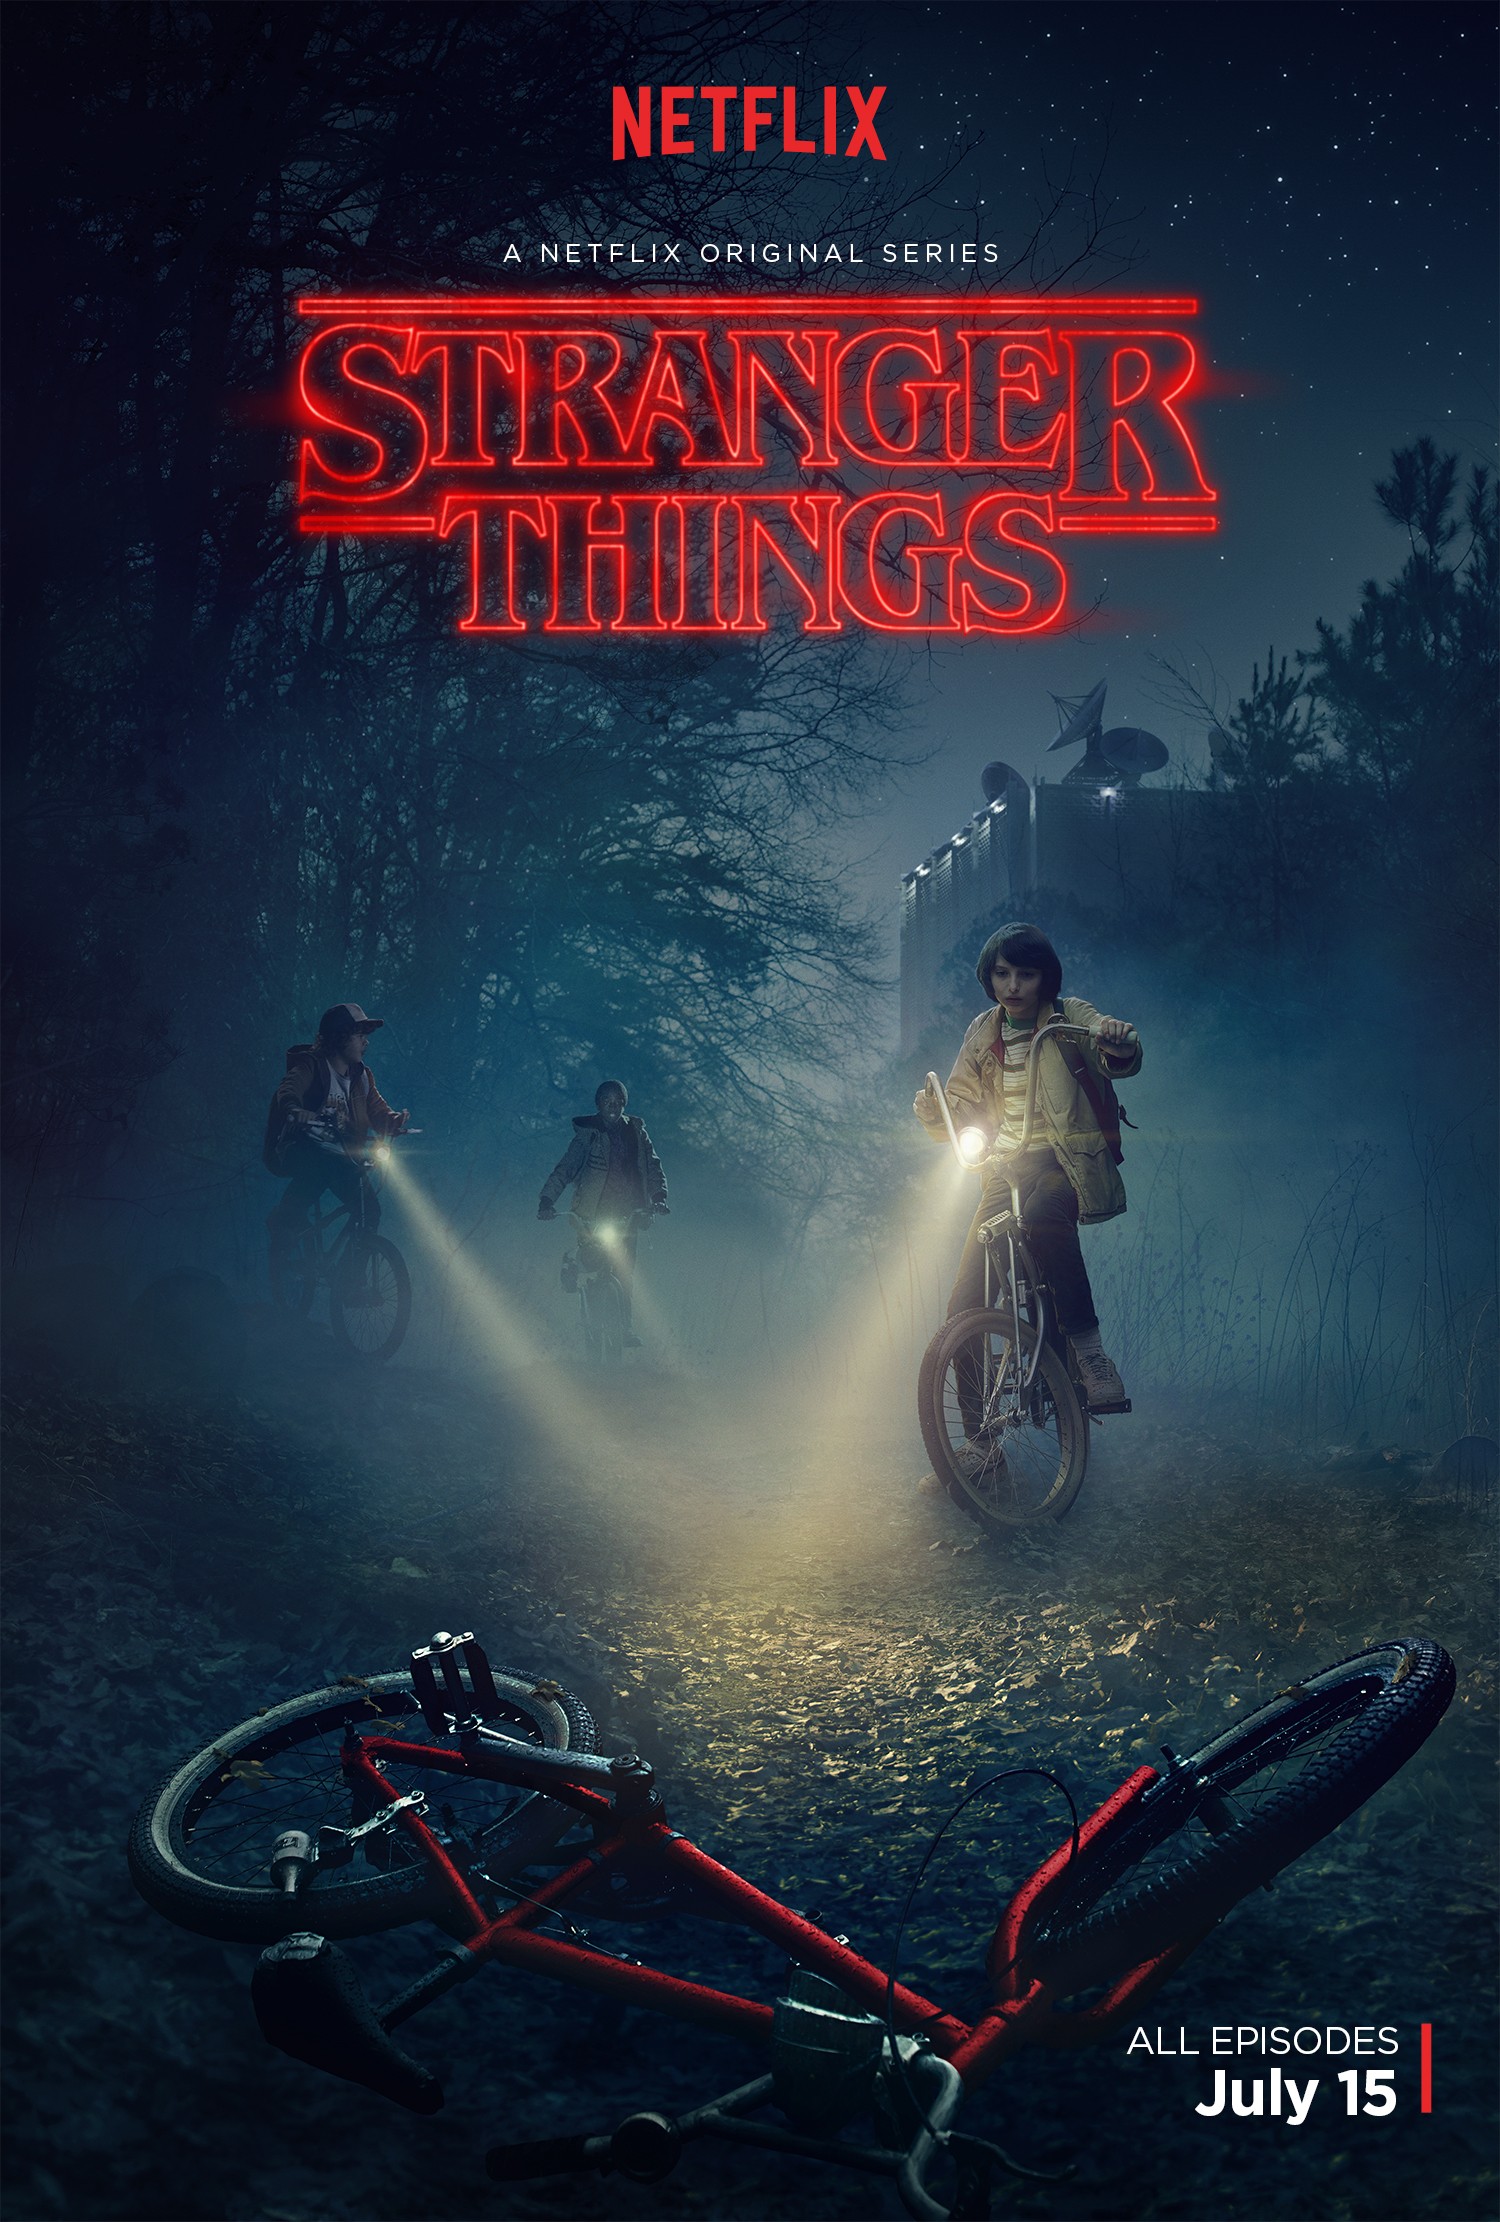 Will's Death Would Be A Sad Stranger Things Season 1 Parallel - IMDb